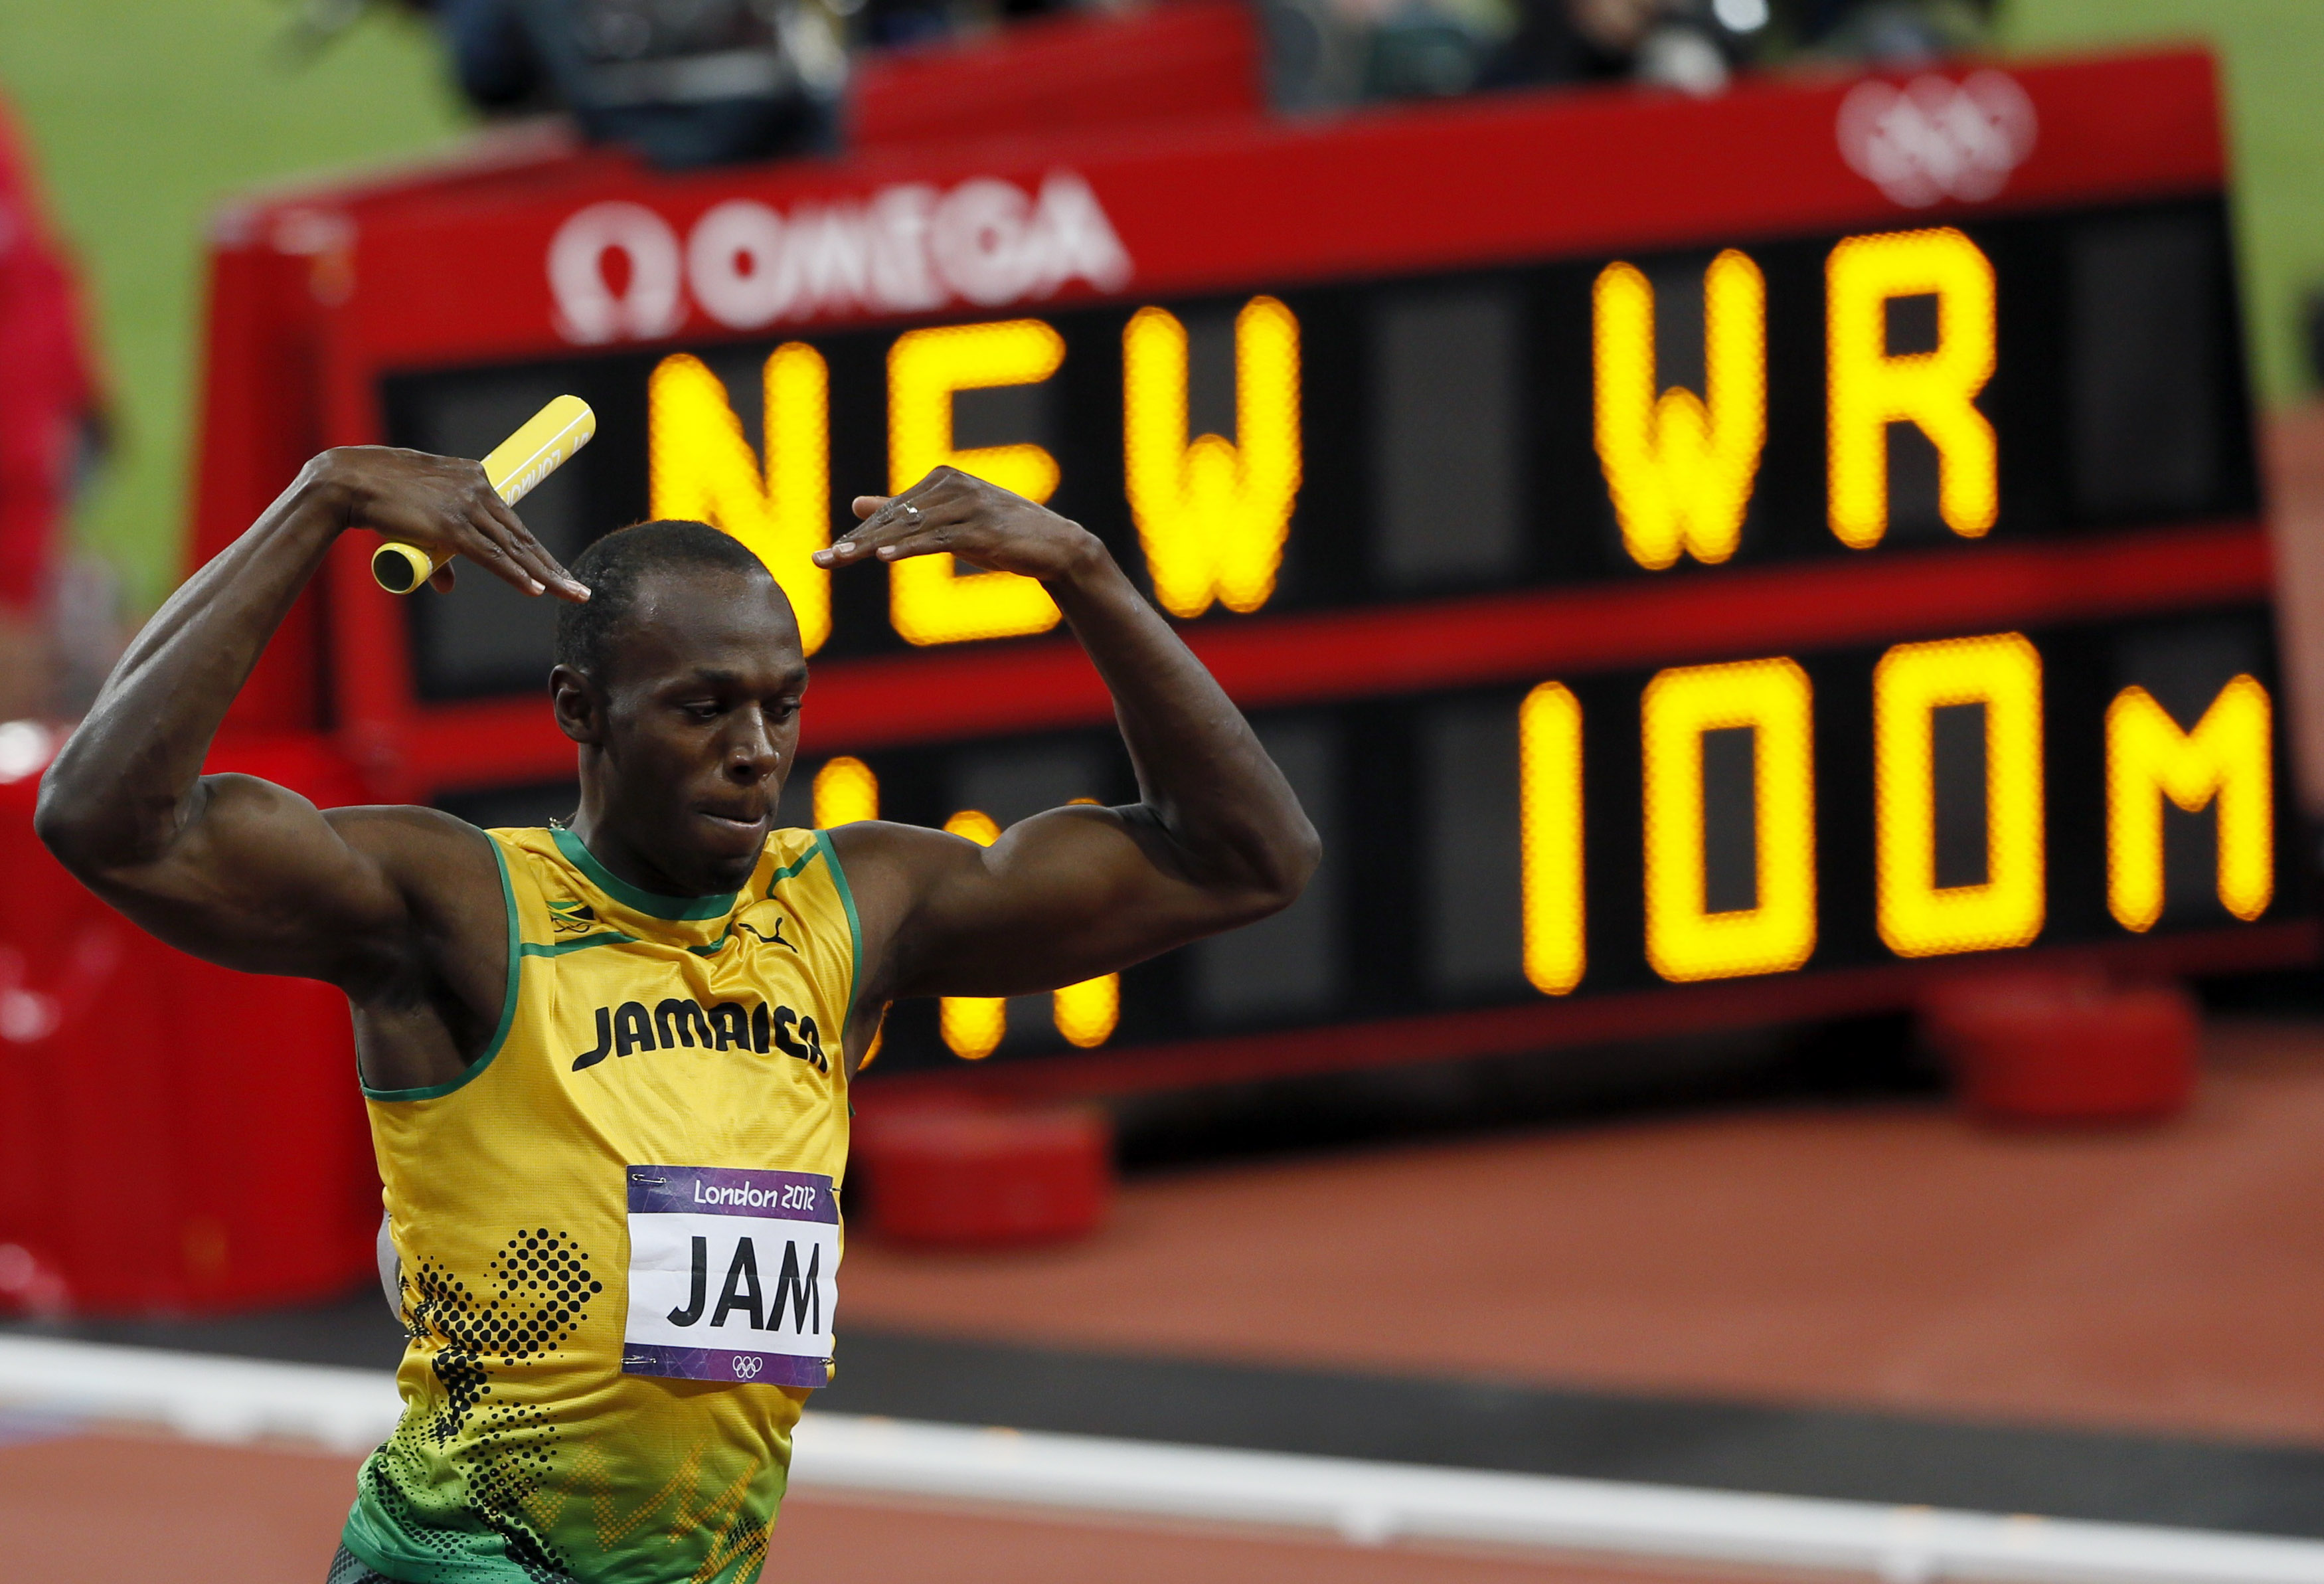 Usain Bolt wins Olympic gold in 100 meters - The Washington Post